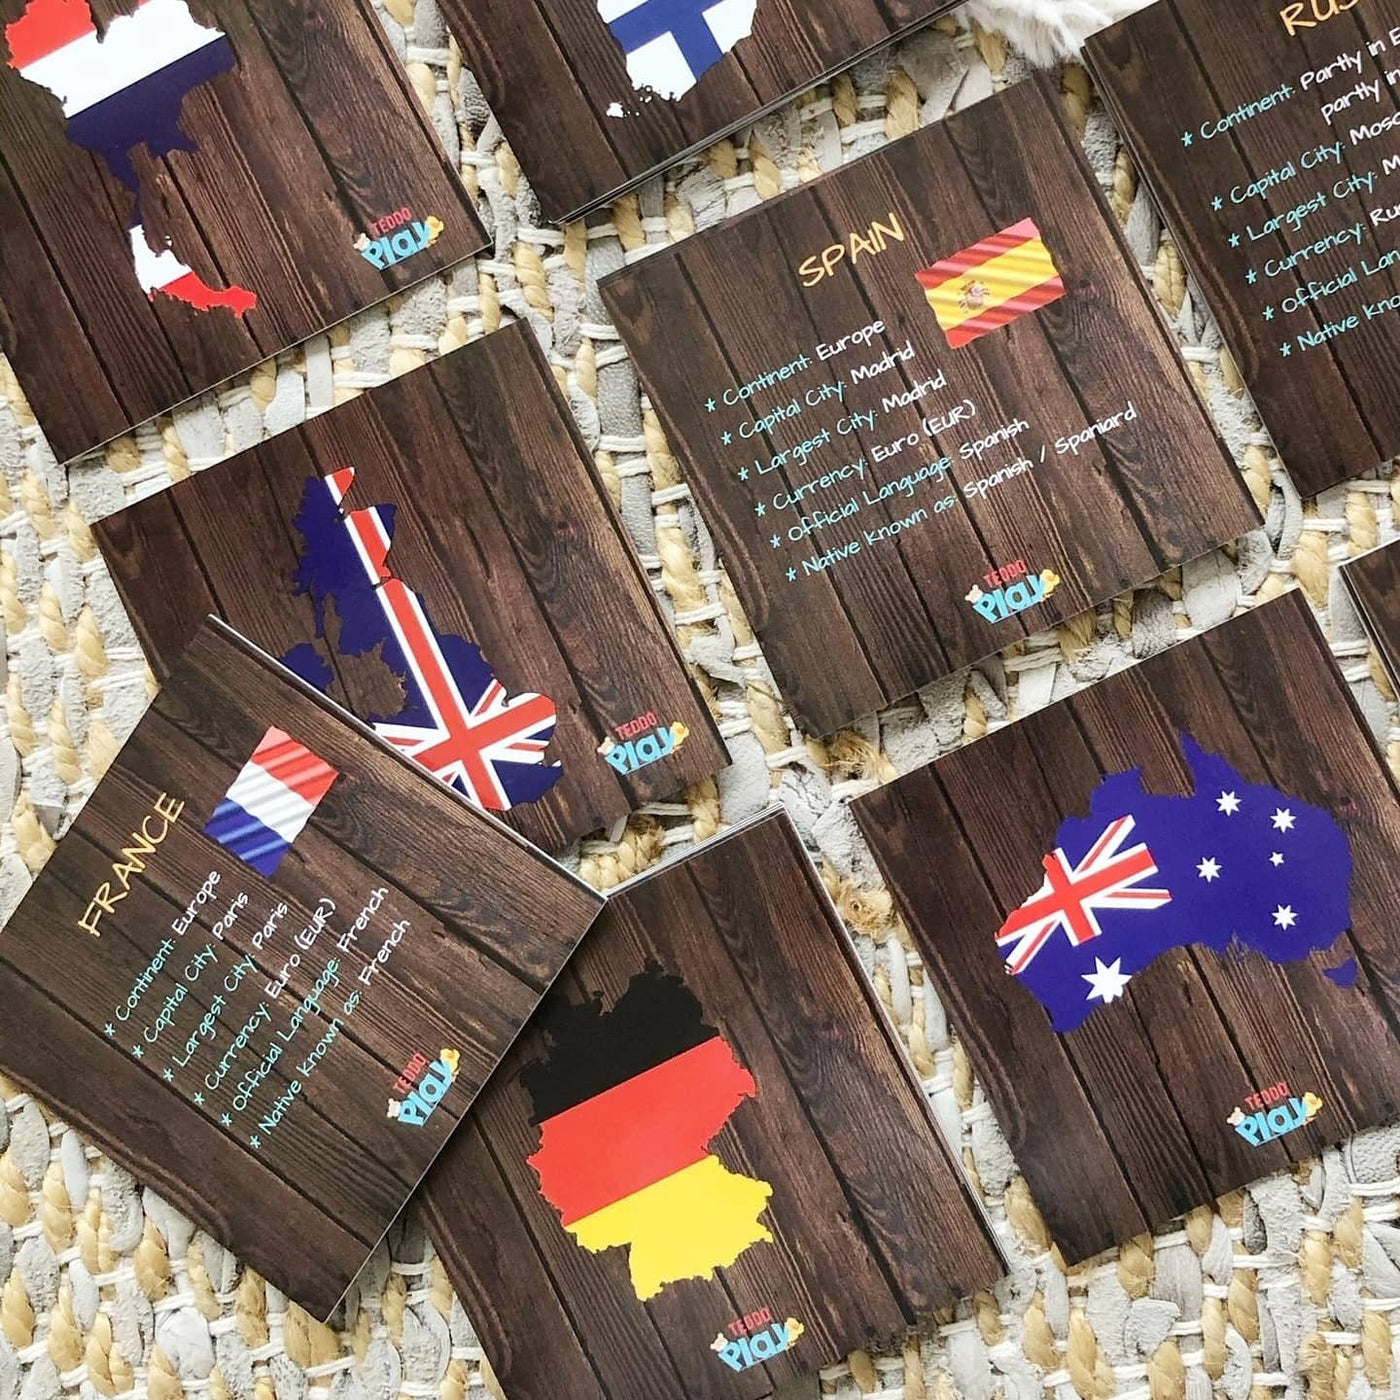 Teddo Play Popular Countries, Cities and Flags of the World -Geography Educational Learning Card Set